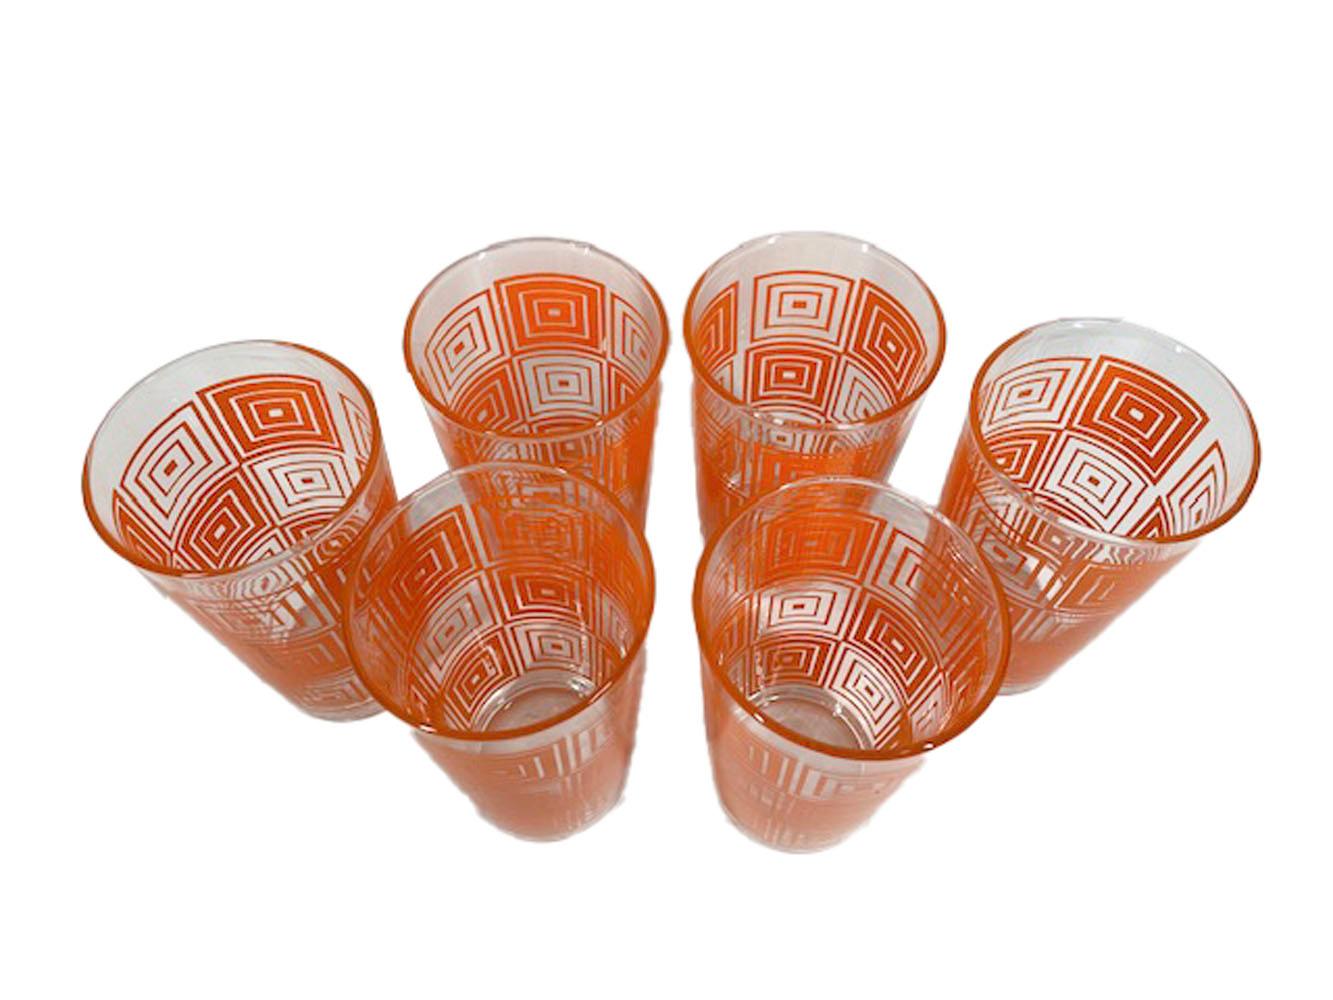 Six Mid-Century Modern tumblers by Federal Glass with blocks of concentric squares in orange enamel, alternating blocks are made up if narrower or wider lines creating an optical effect.